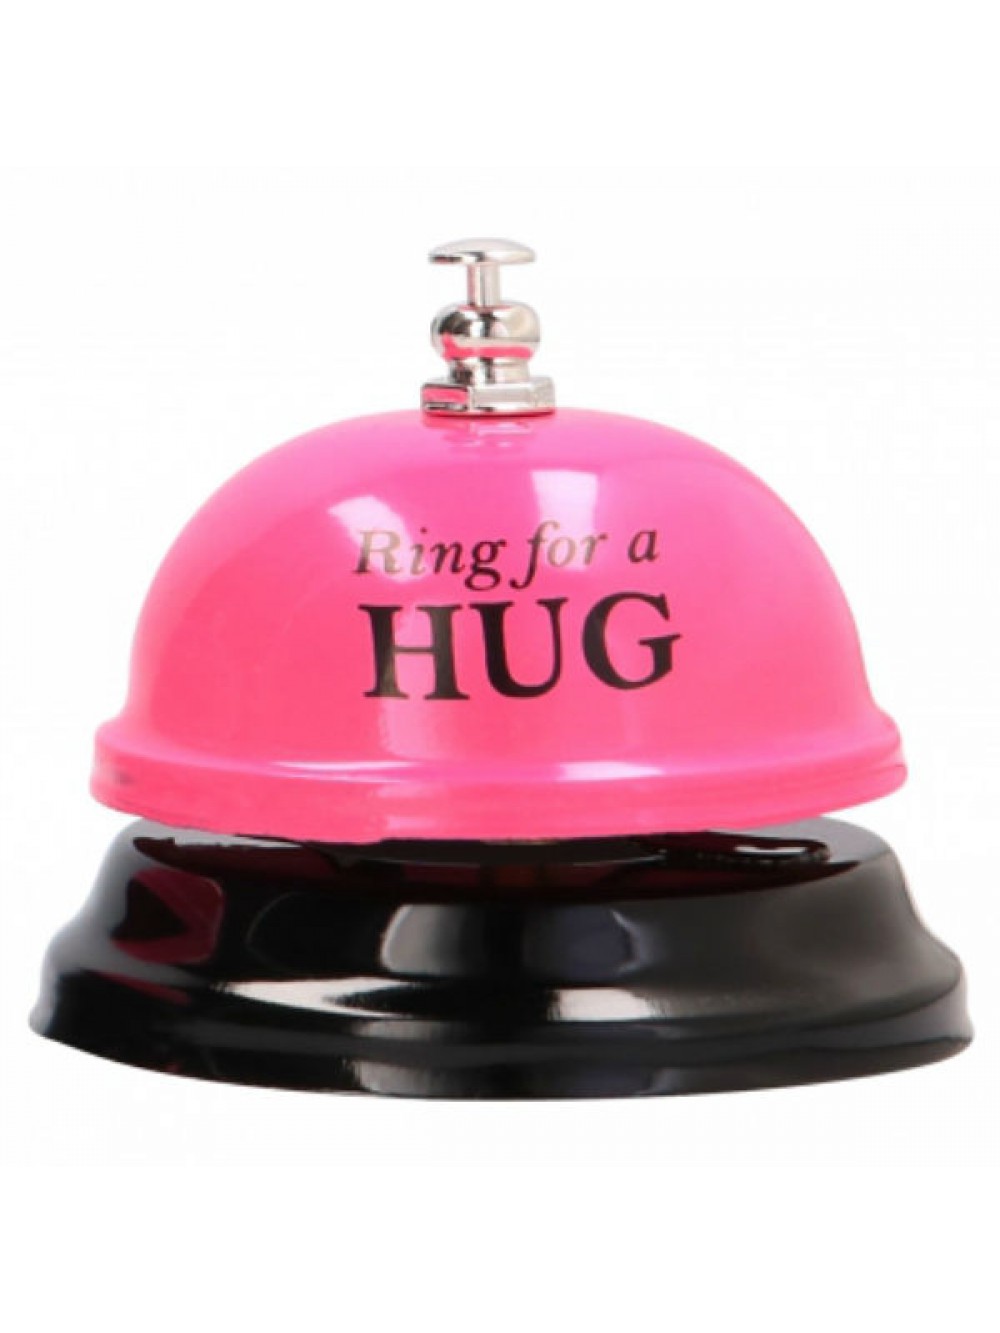 RING FOR A HUG HOTEL BELL PINK 8714273940117